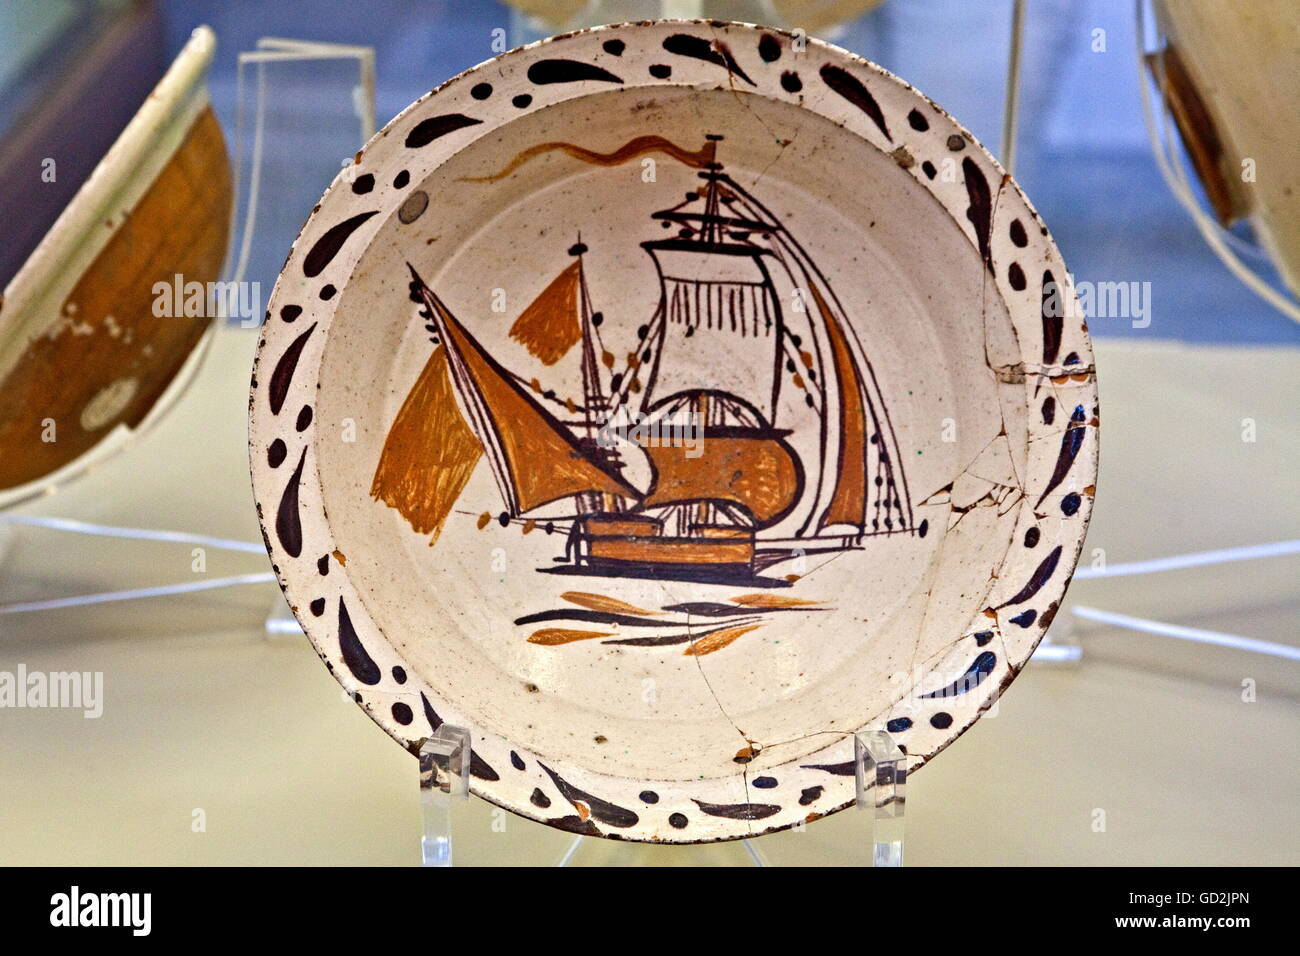 fine arts, ceramics, glazed Iznik plate from the glazed tile pavilion, Cinili Koesk, archaeological museum, Istanbul, Artist's Copyright has not to be cleared Stock Photo